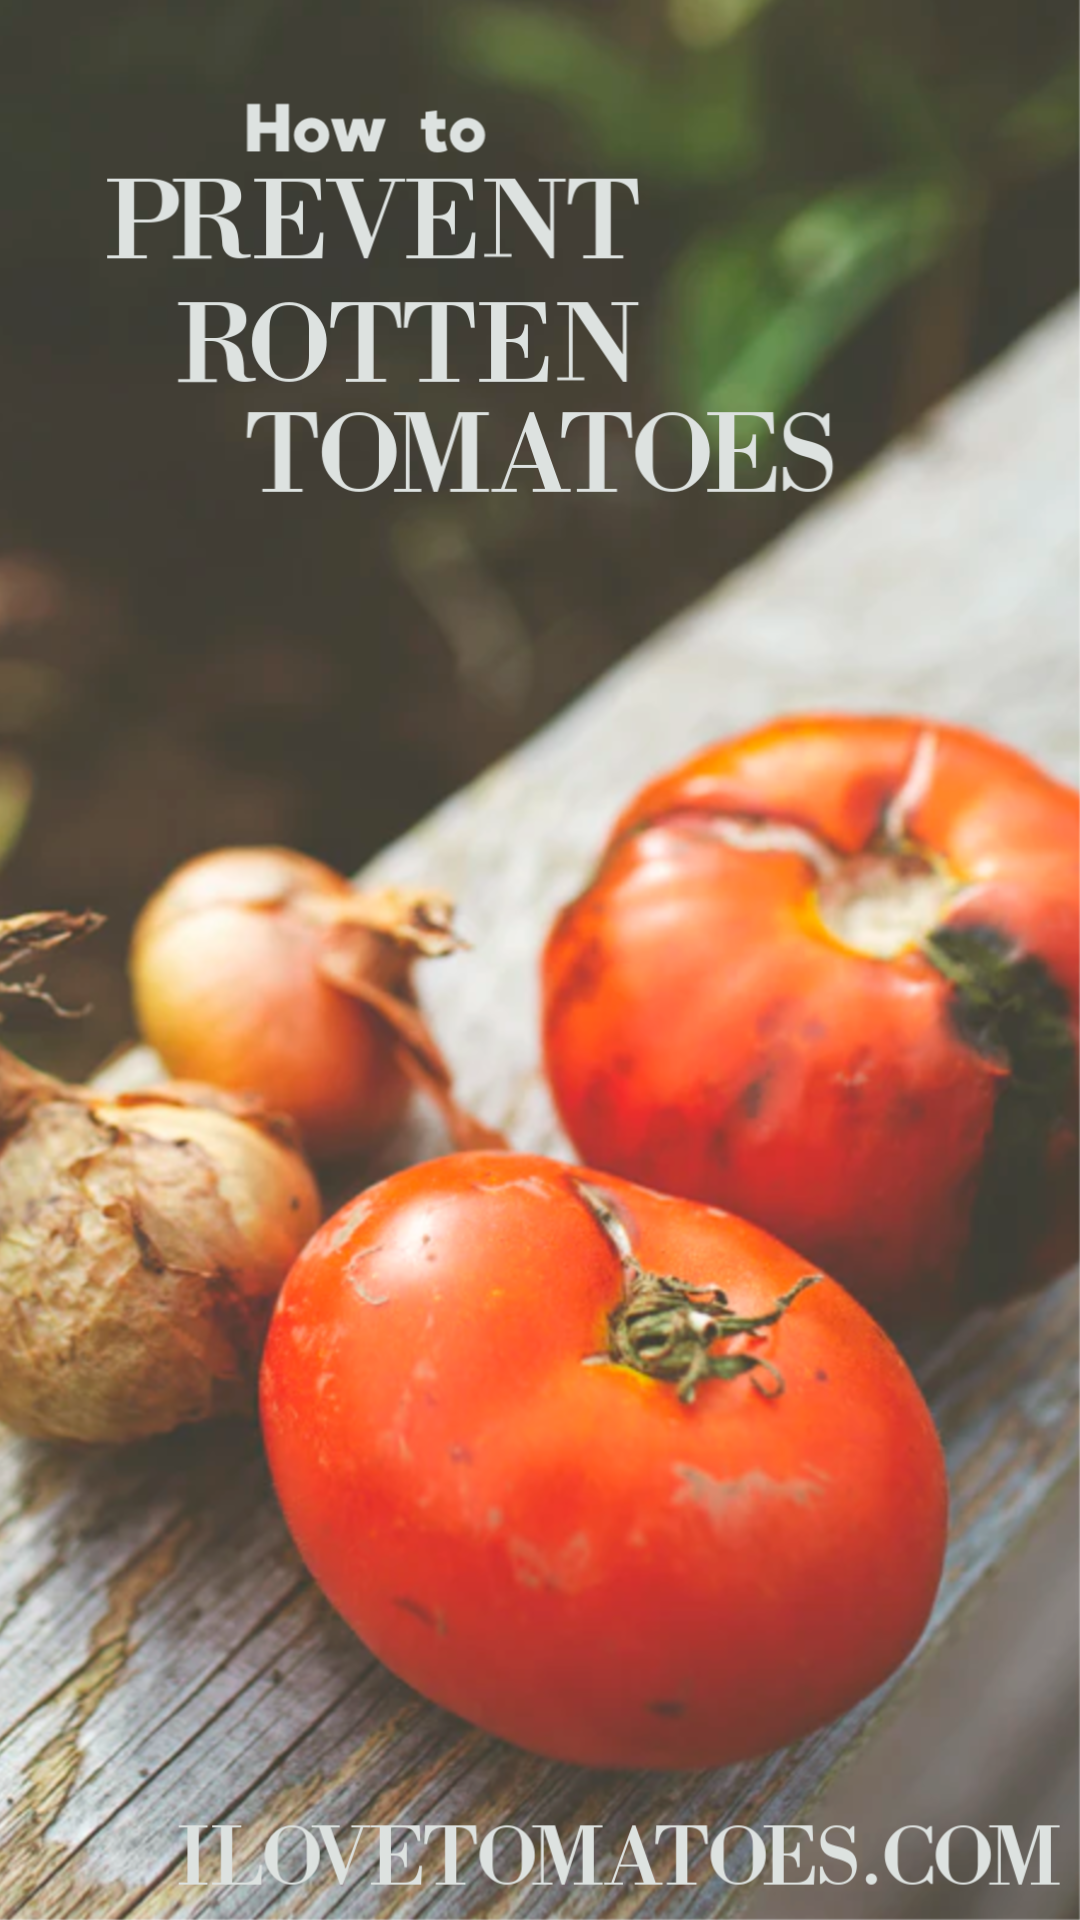 How to Prevent Rotten Tomatoes